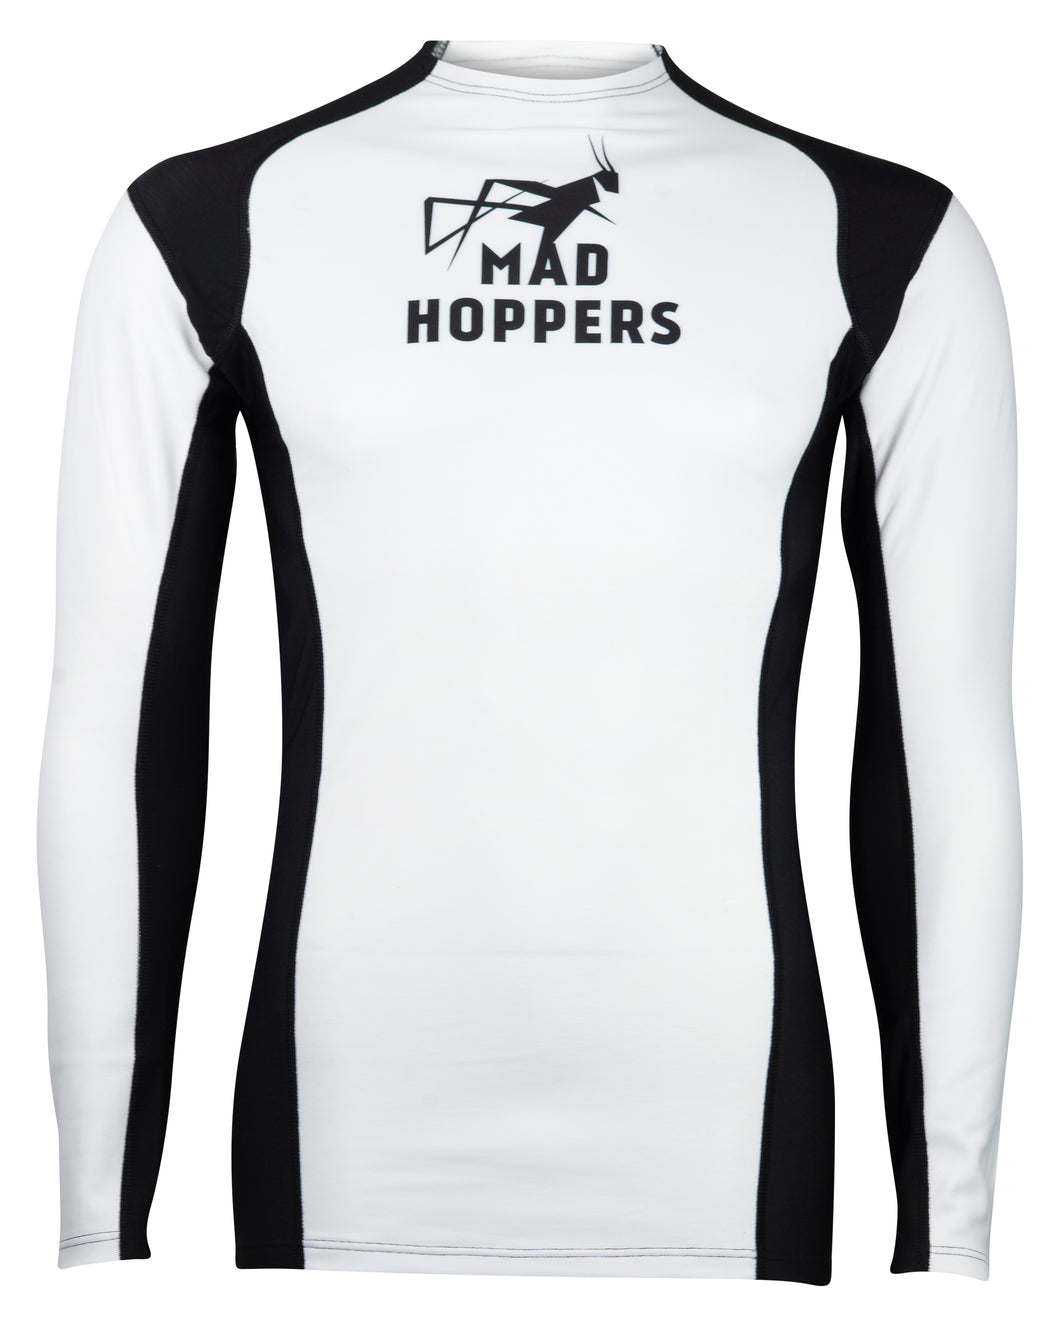 White Thermal Shirt Long Sleeve - Mad Hoppers